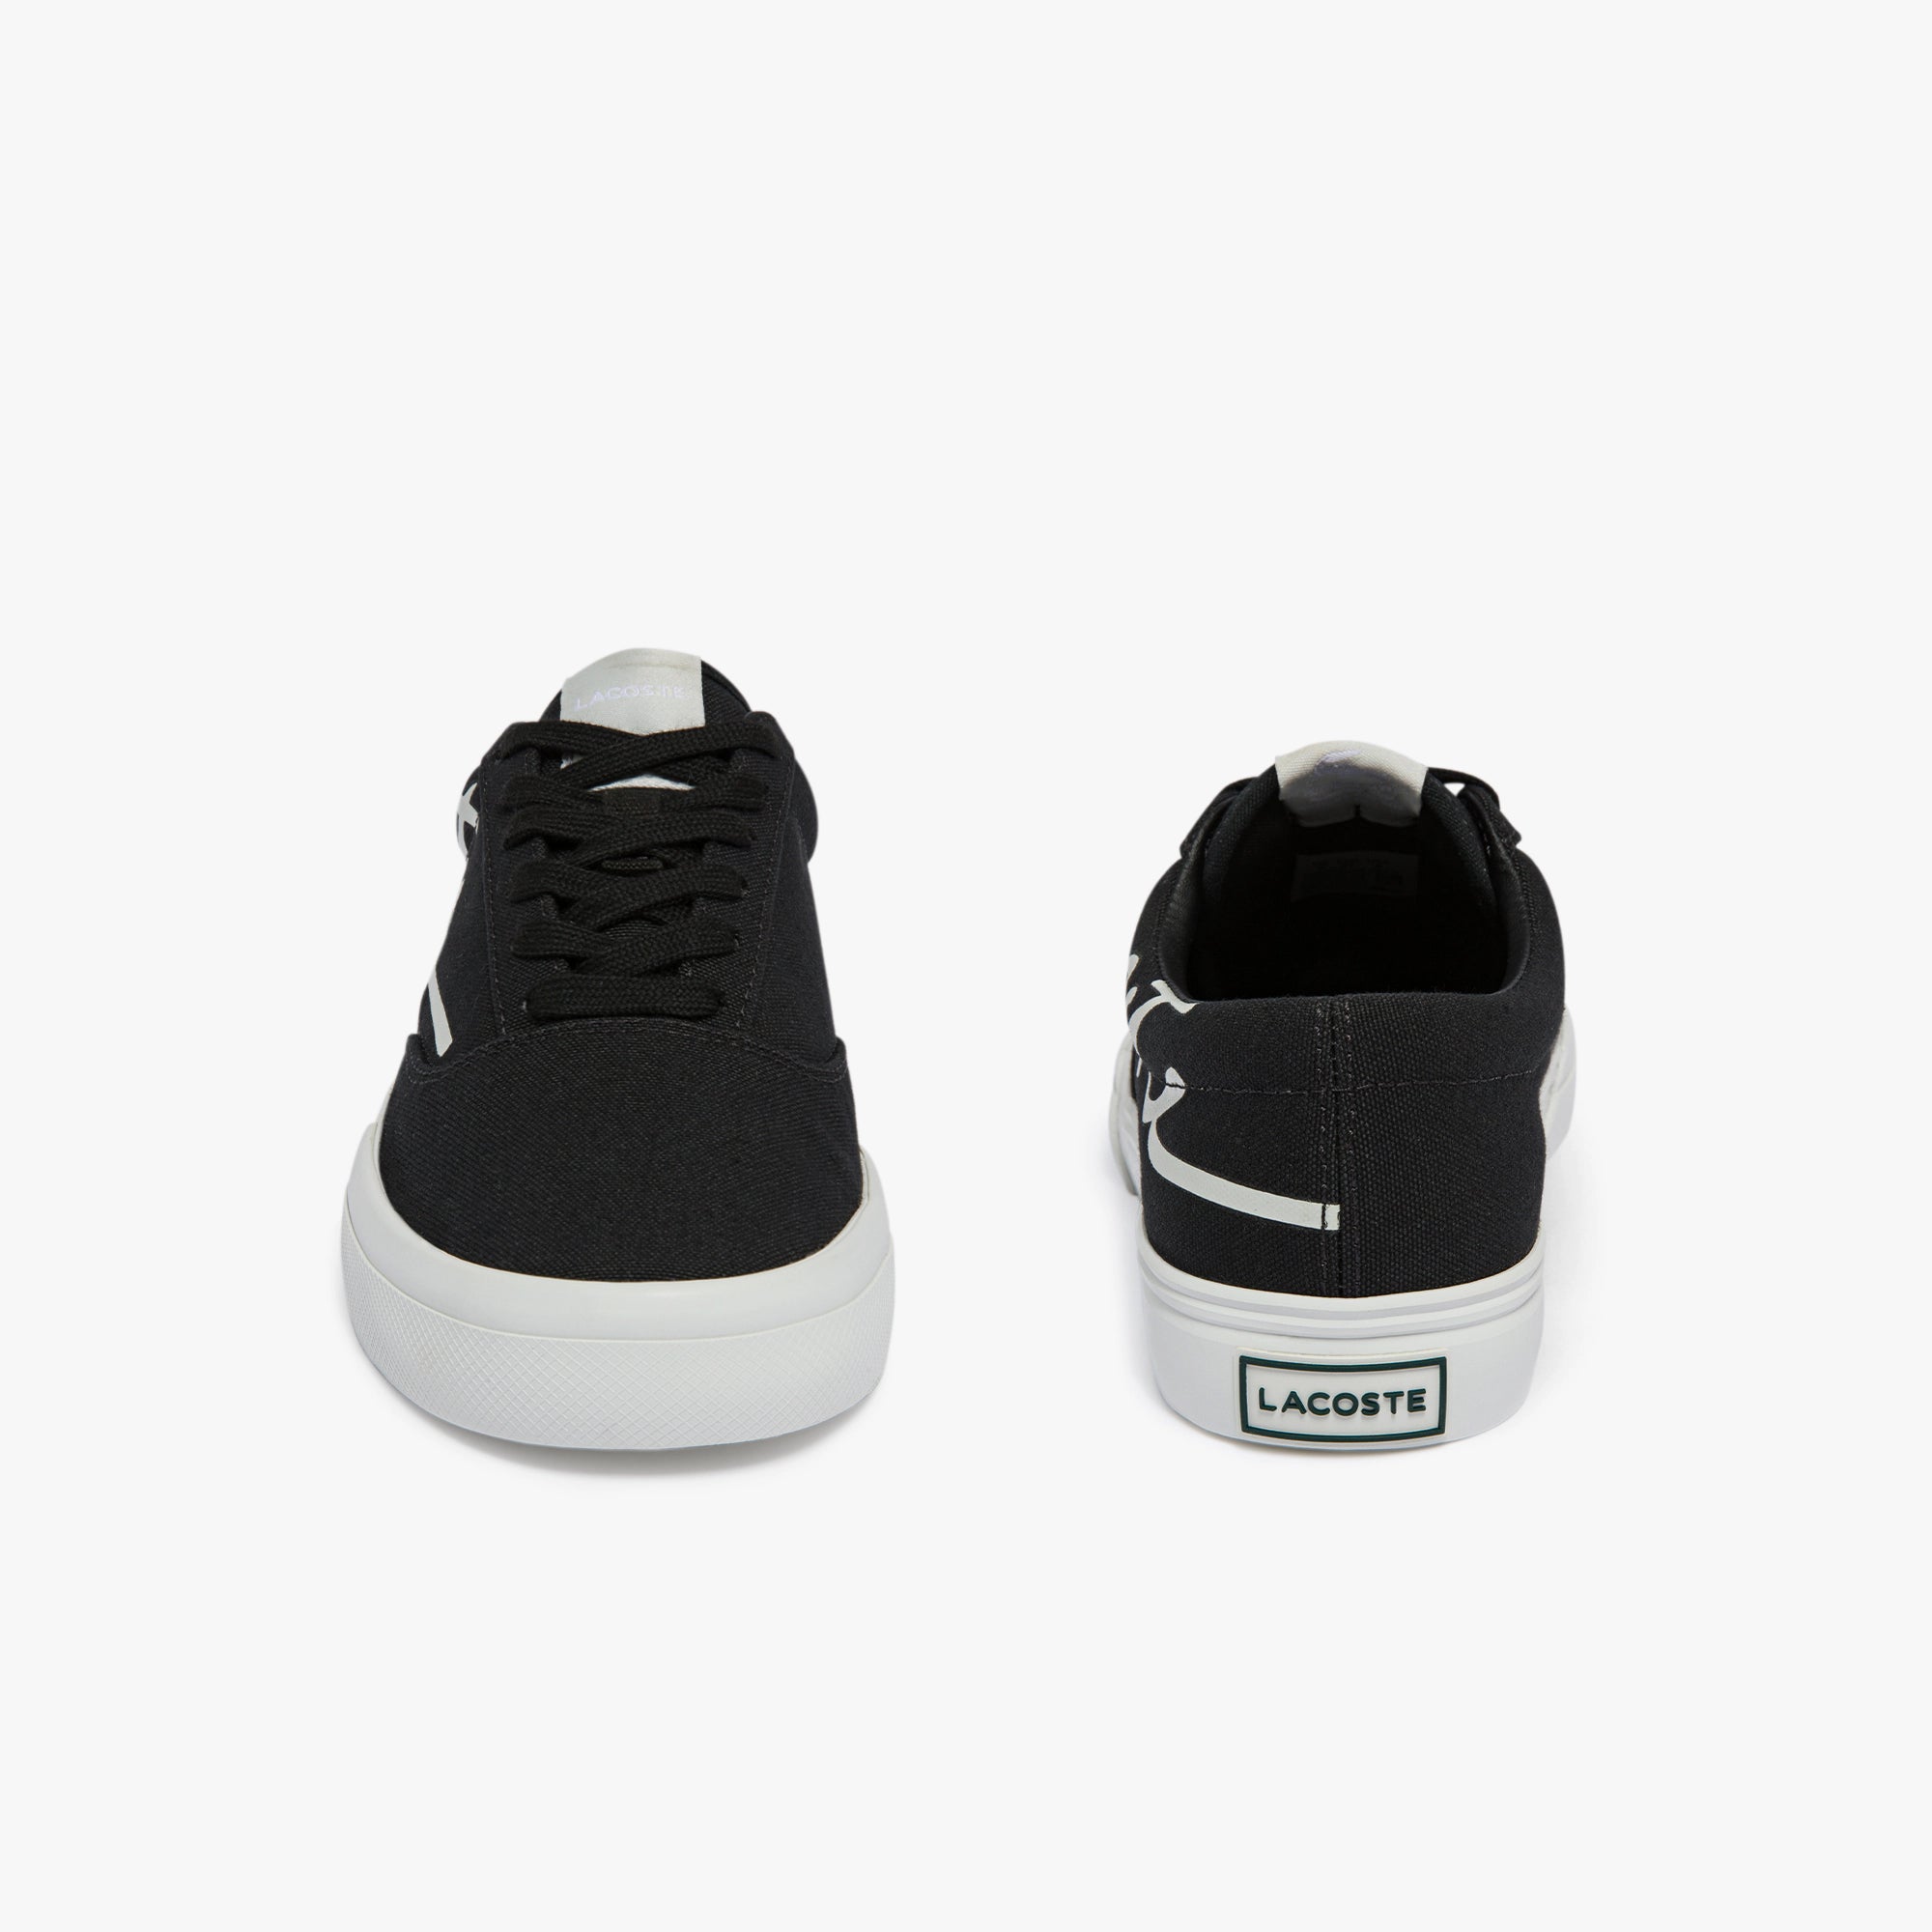 Jump Serve Lace Canvas Black/off White Sneakers